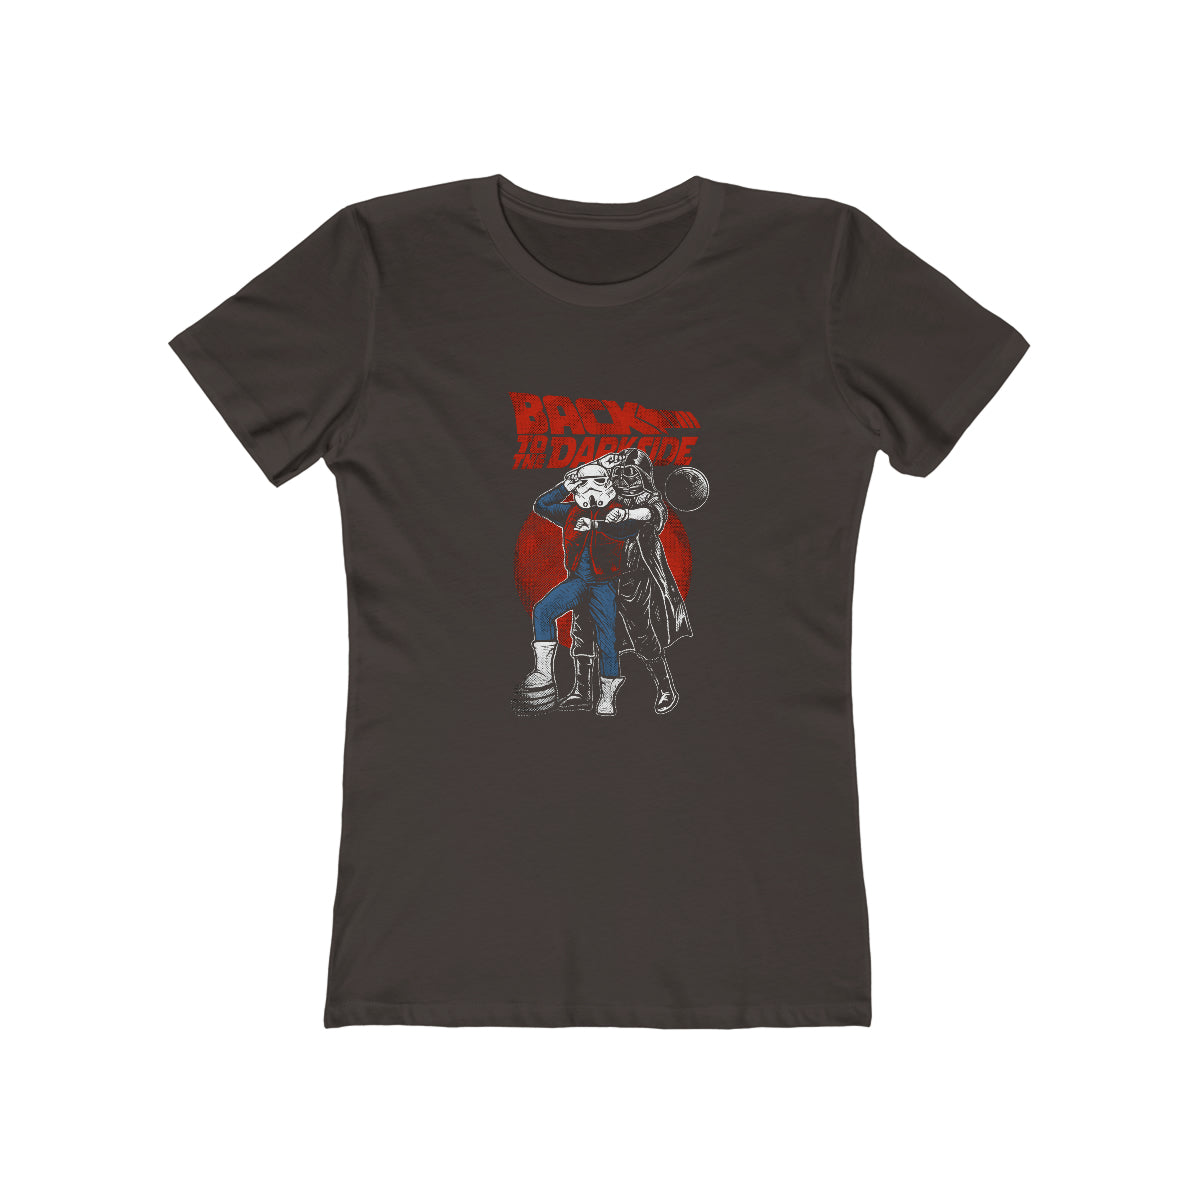 Back To The Darkside - Women's T-shirt